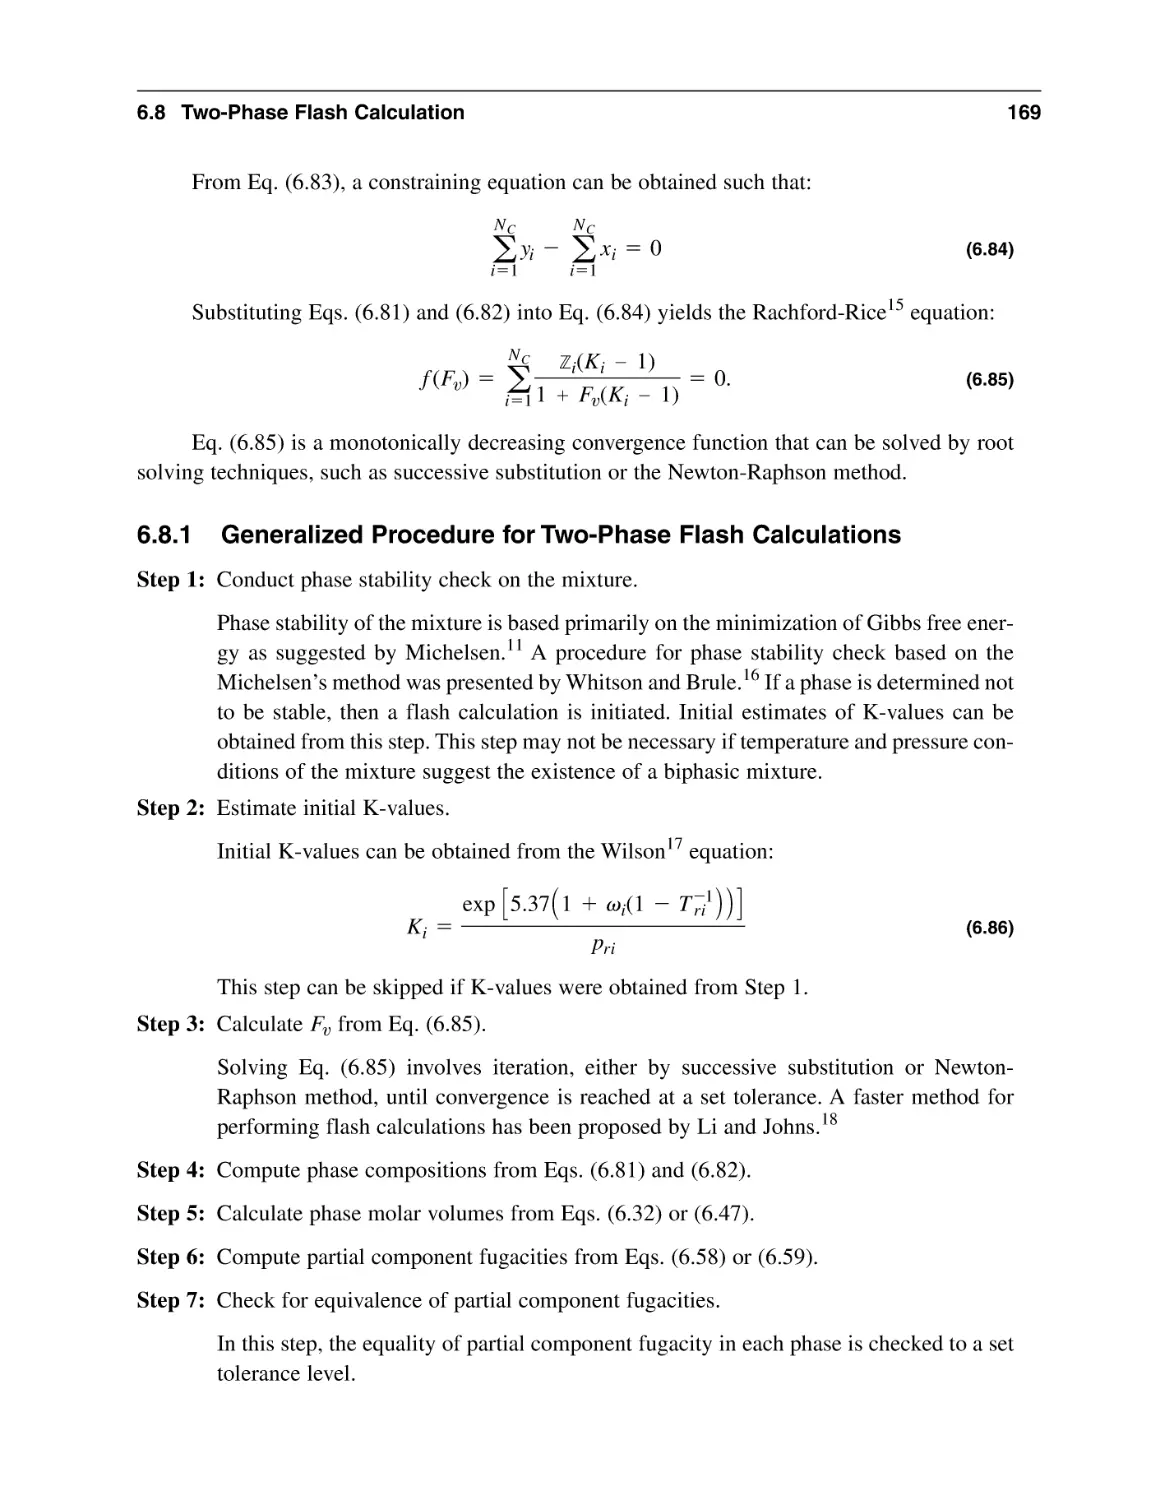 6.8.1 Generalized Procedure for Two-Phase Flash Calculations